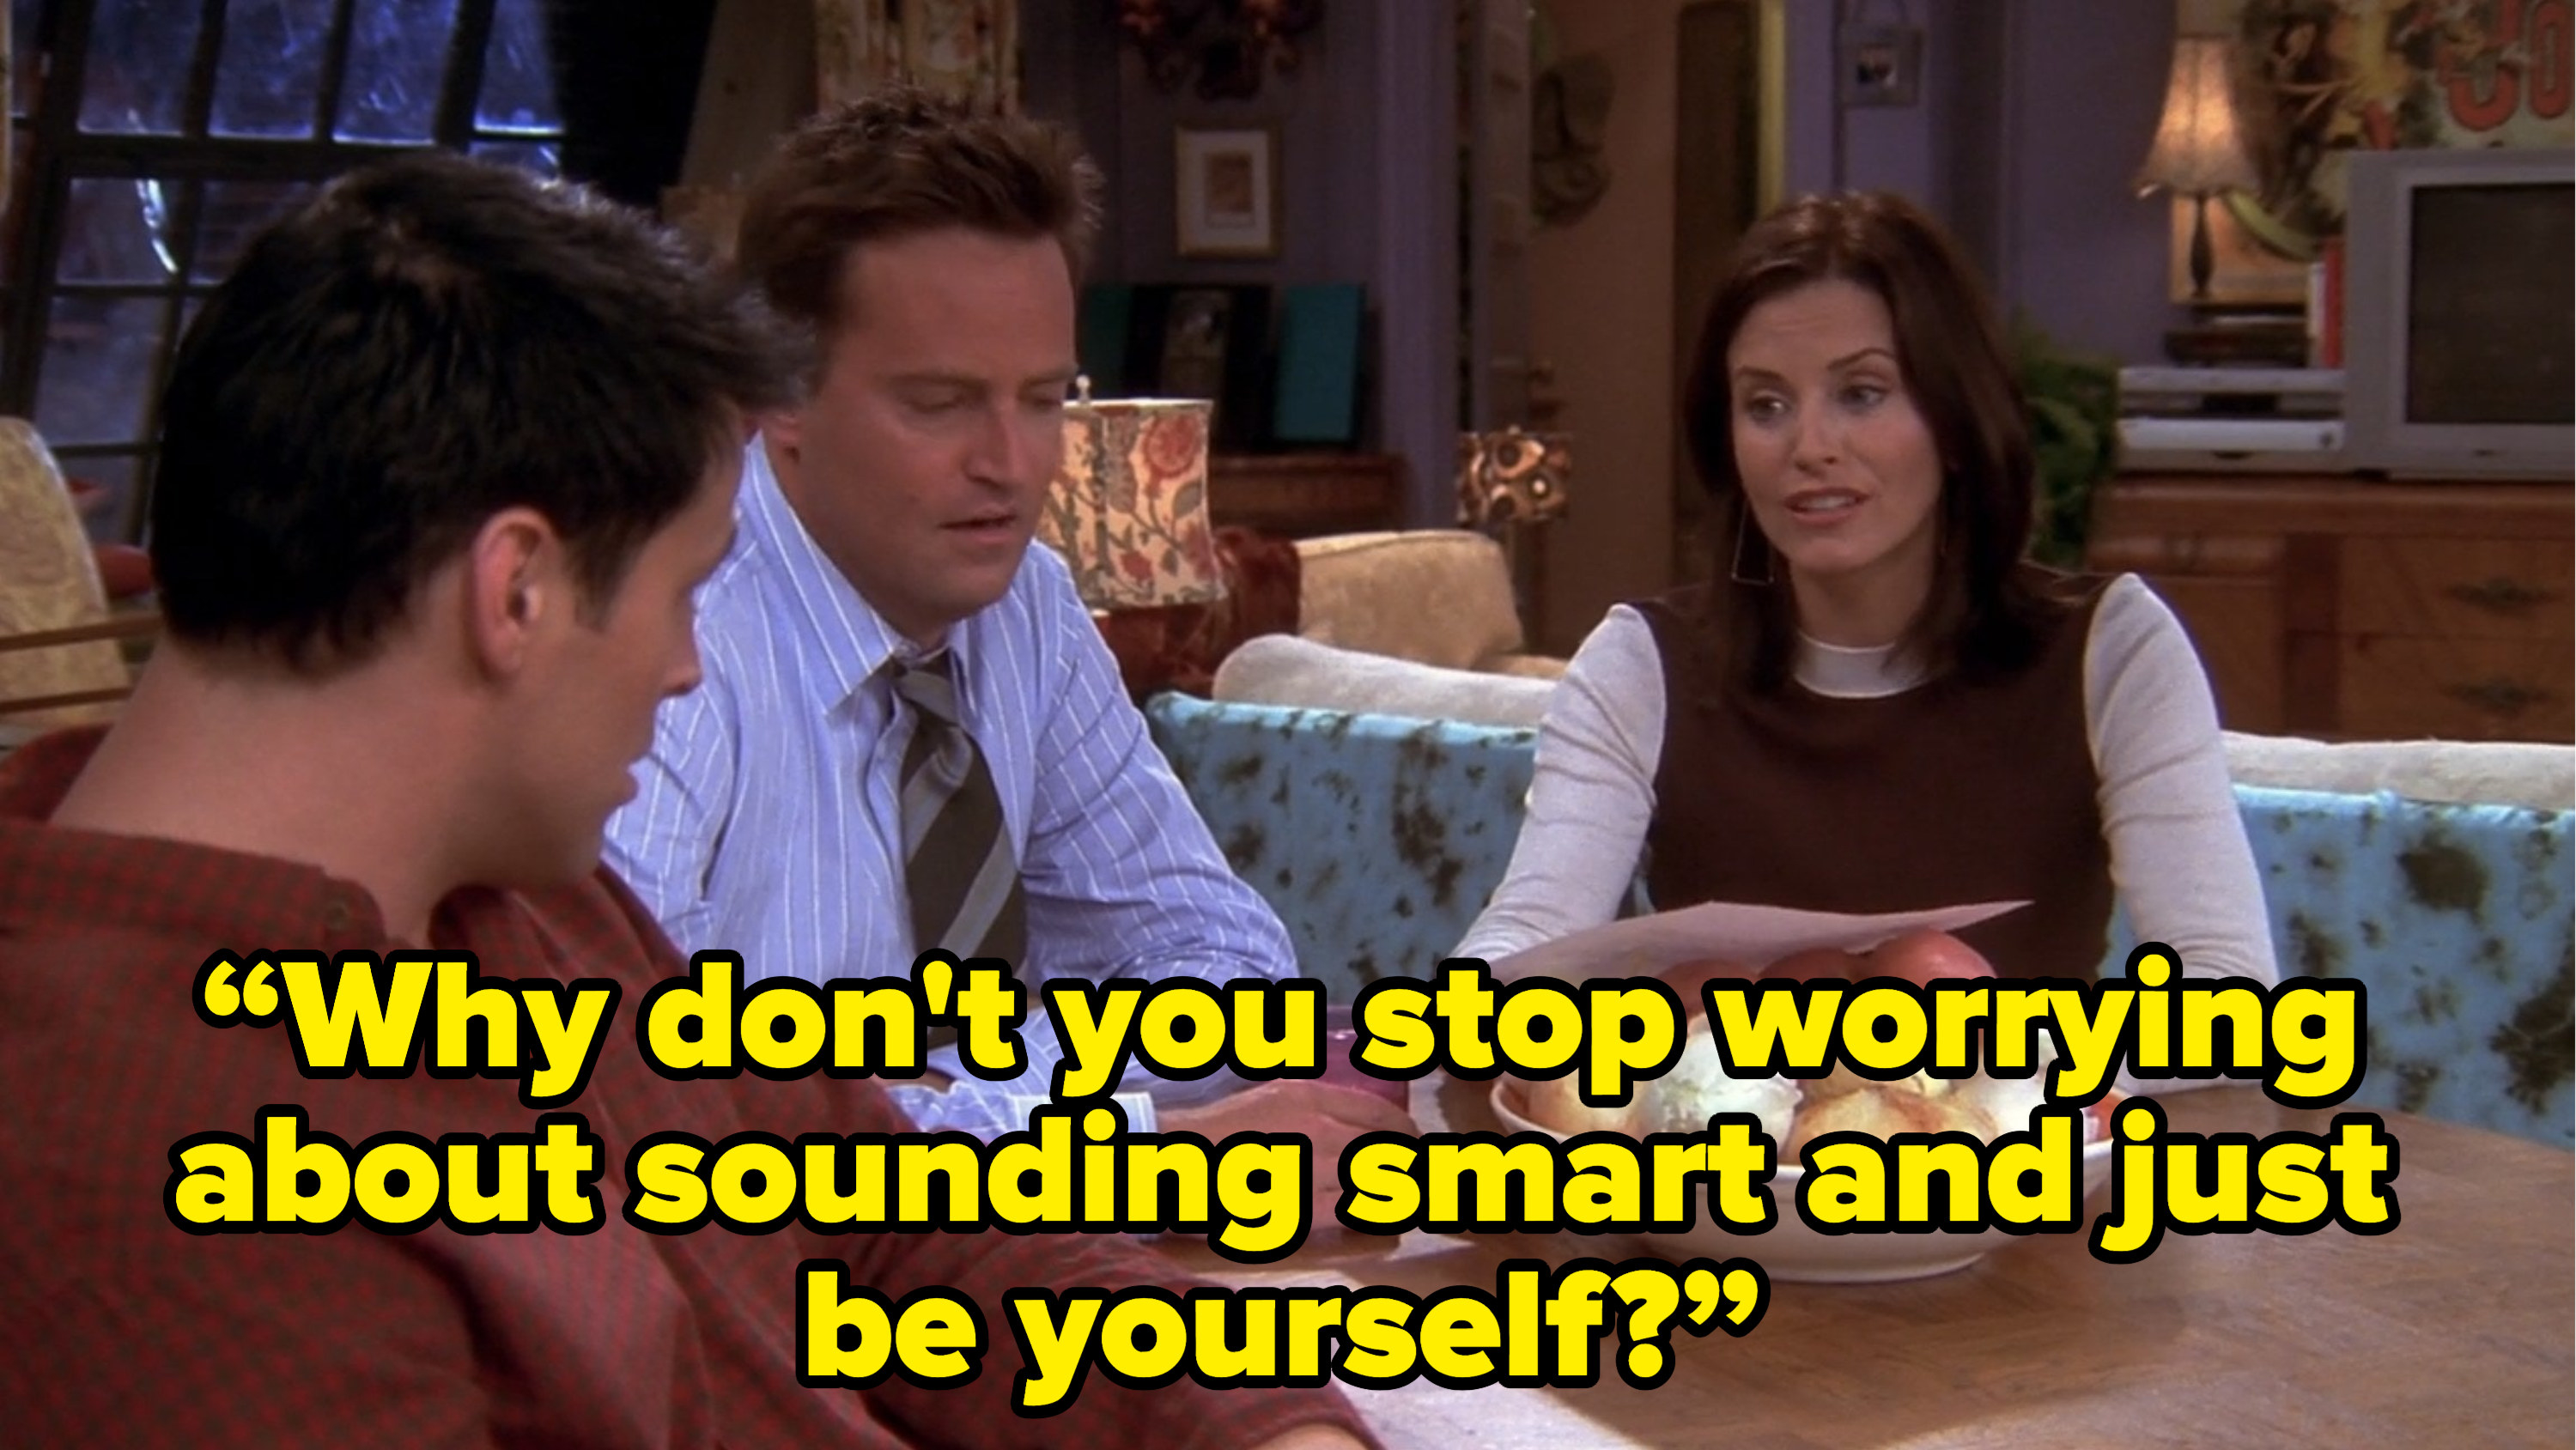 monica saying to joey “Why don&#x27;t you stop worrying about sounding smart and just be yourself?” on friends